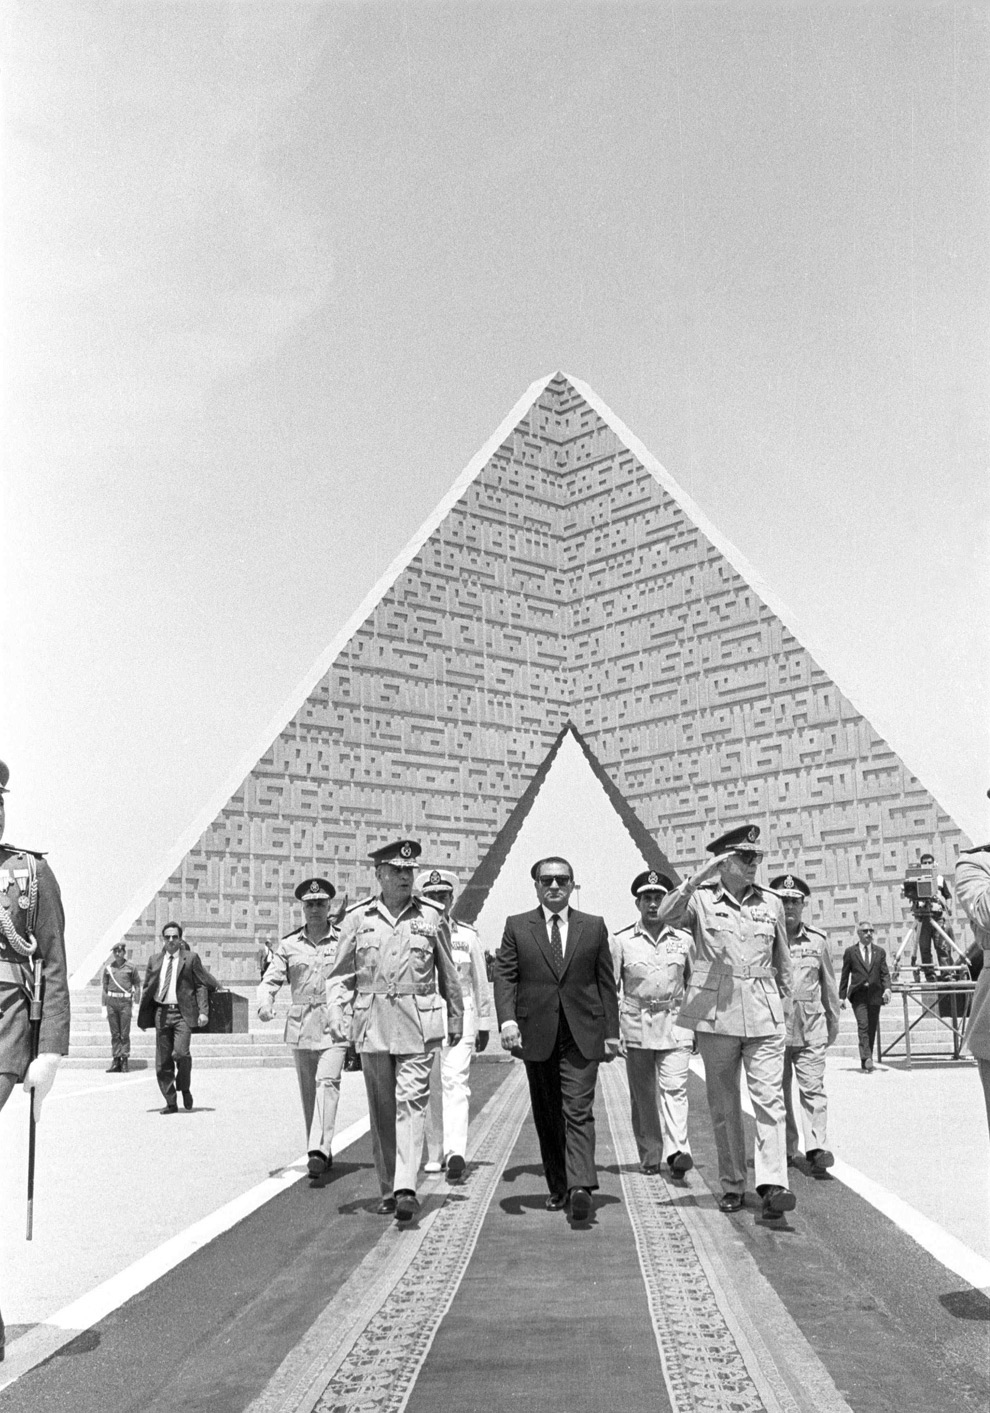 Egyptian President Hosni Mubarak, flanked by his Defense Minister Field Marshall Abdul-Halim Abu-Ghazala (L) and Chief of Staff Lieutenant General Ibrahim Orabi (R), visits the tomb of the Unknown Soldier, Cairo, April 24, 1986.